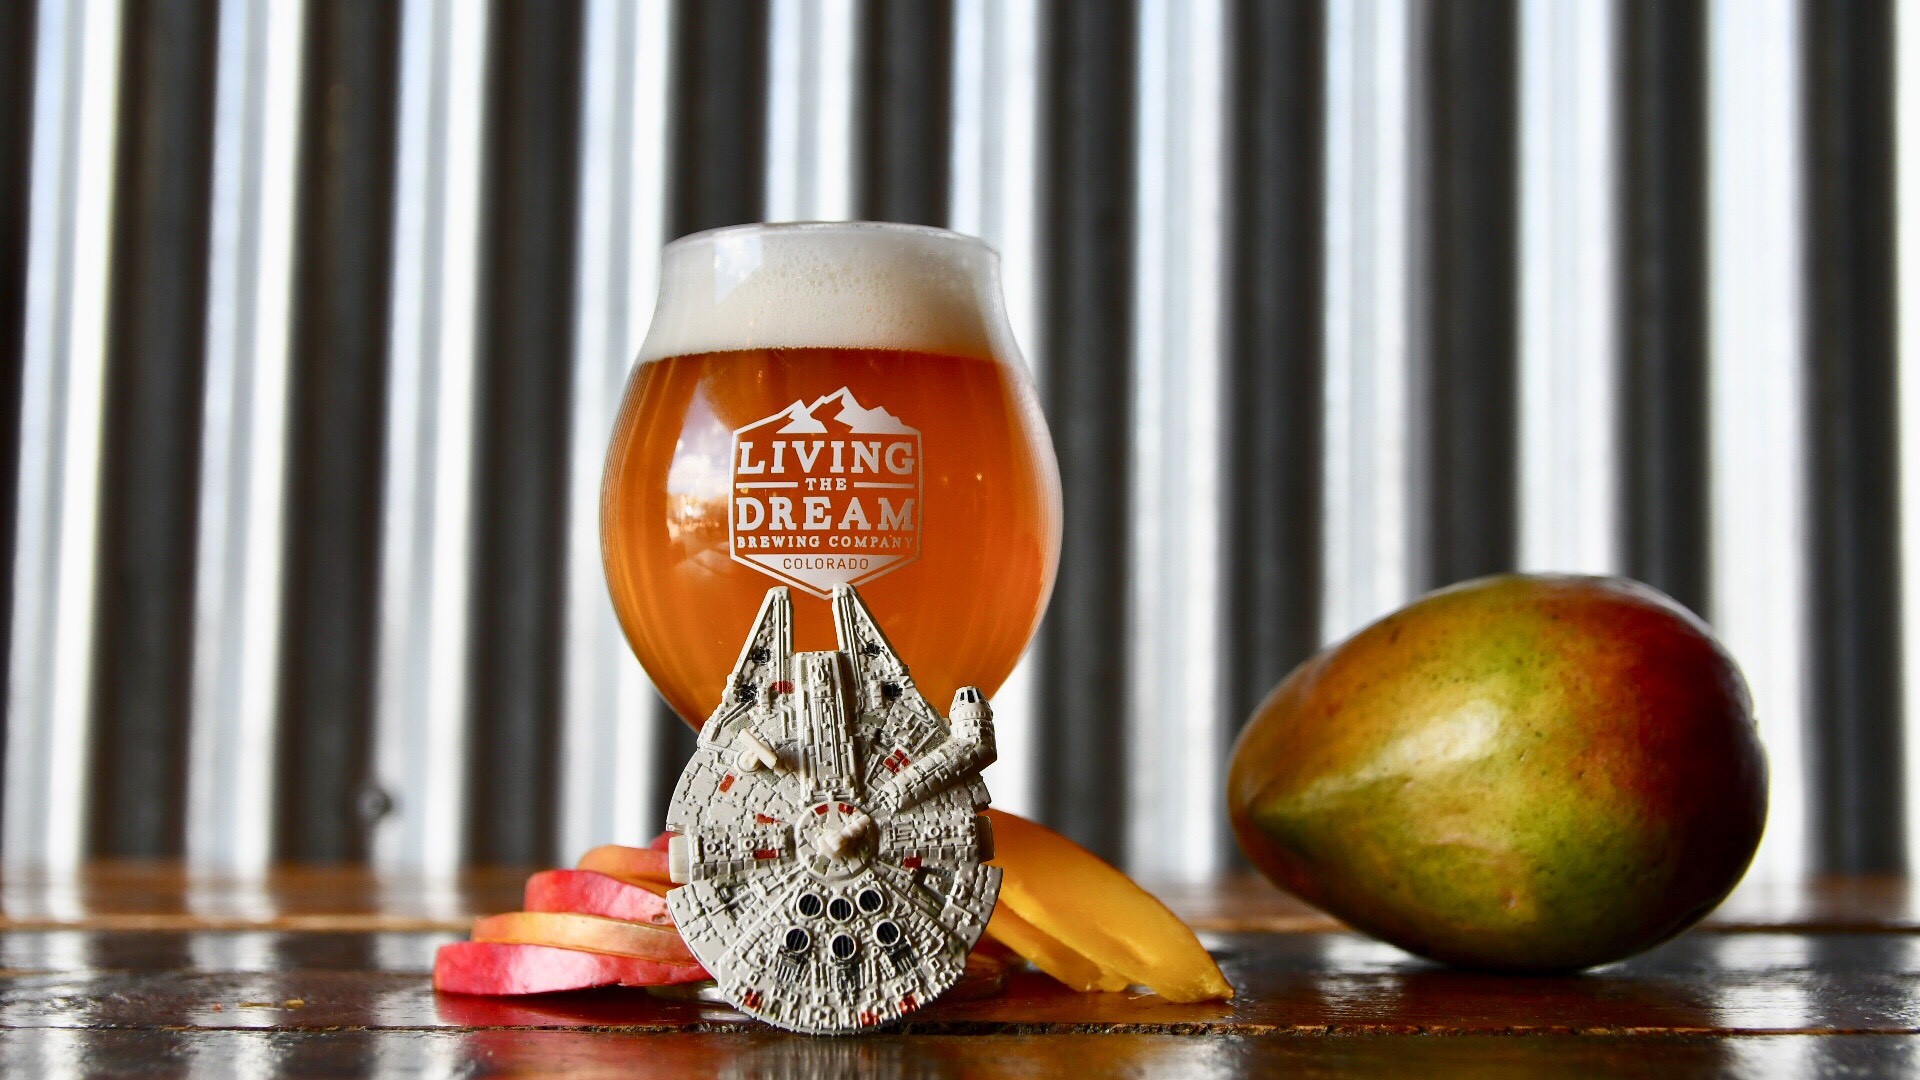 Living the Dream Brewing Teams Up with Alamo Drafthouse on Pathfinder IPA